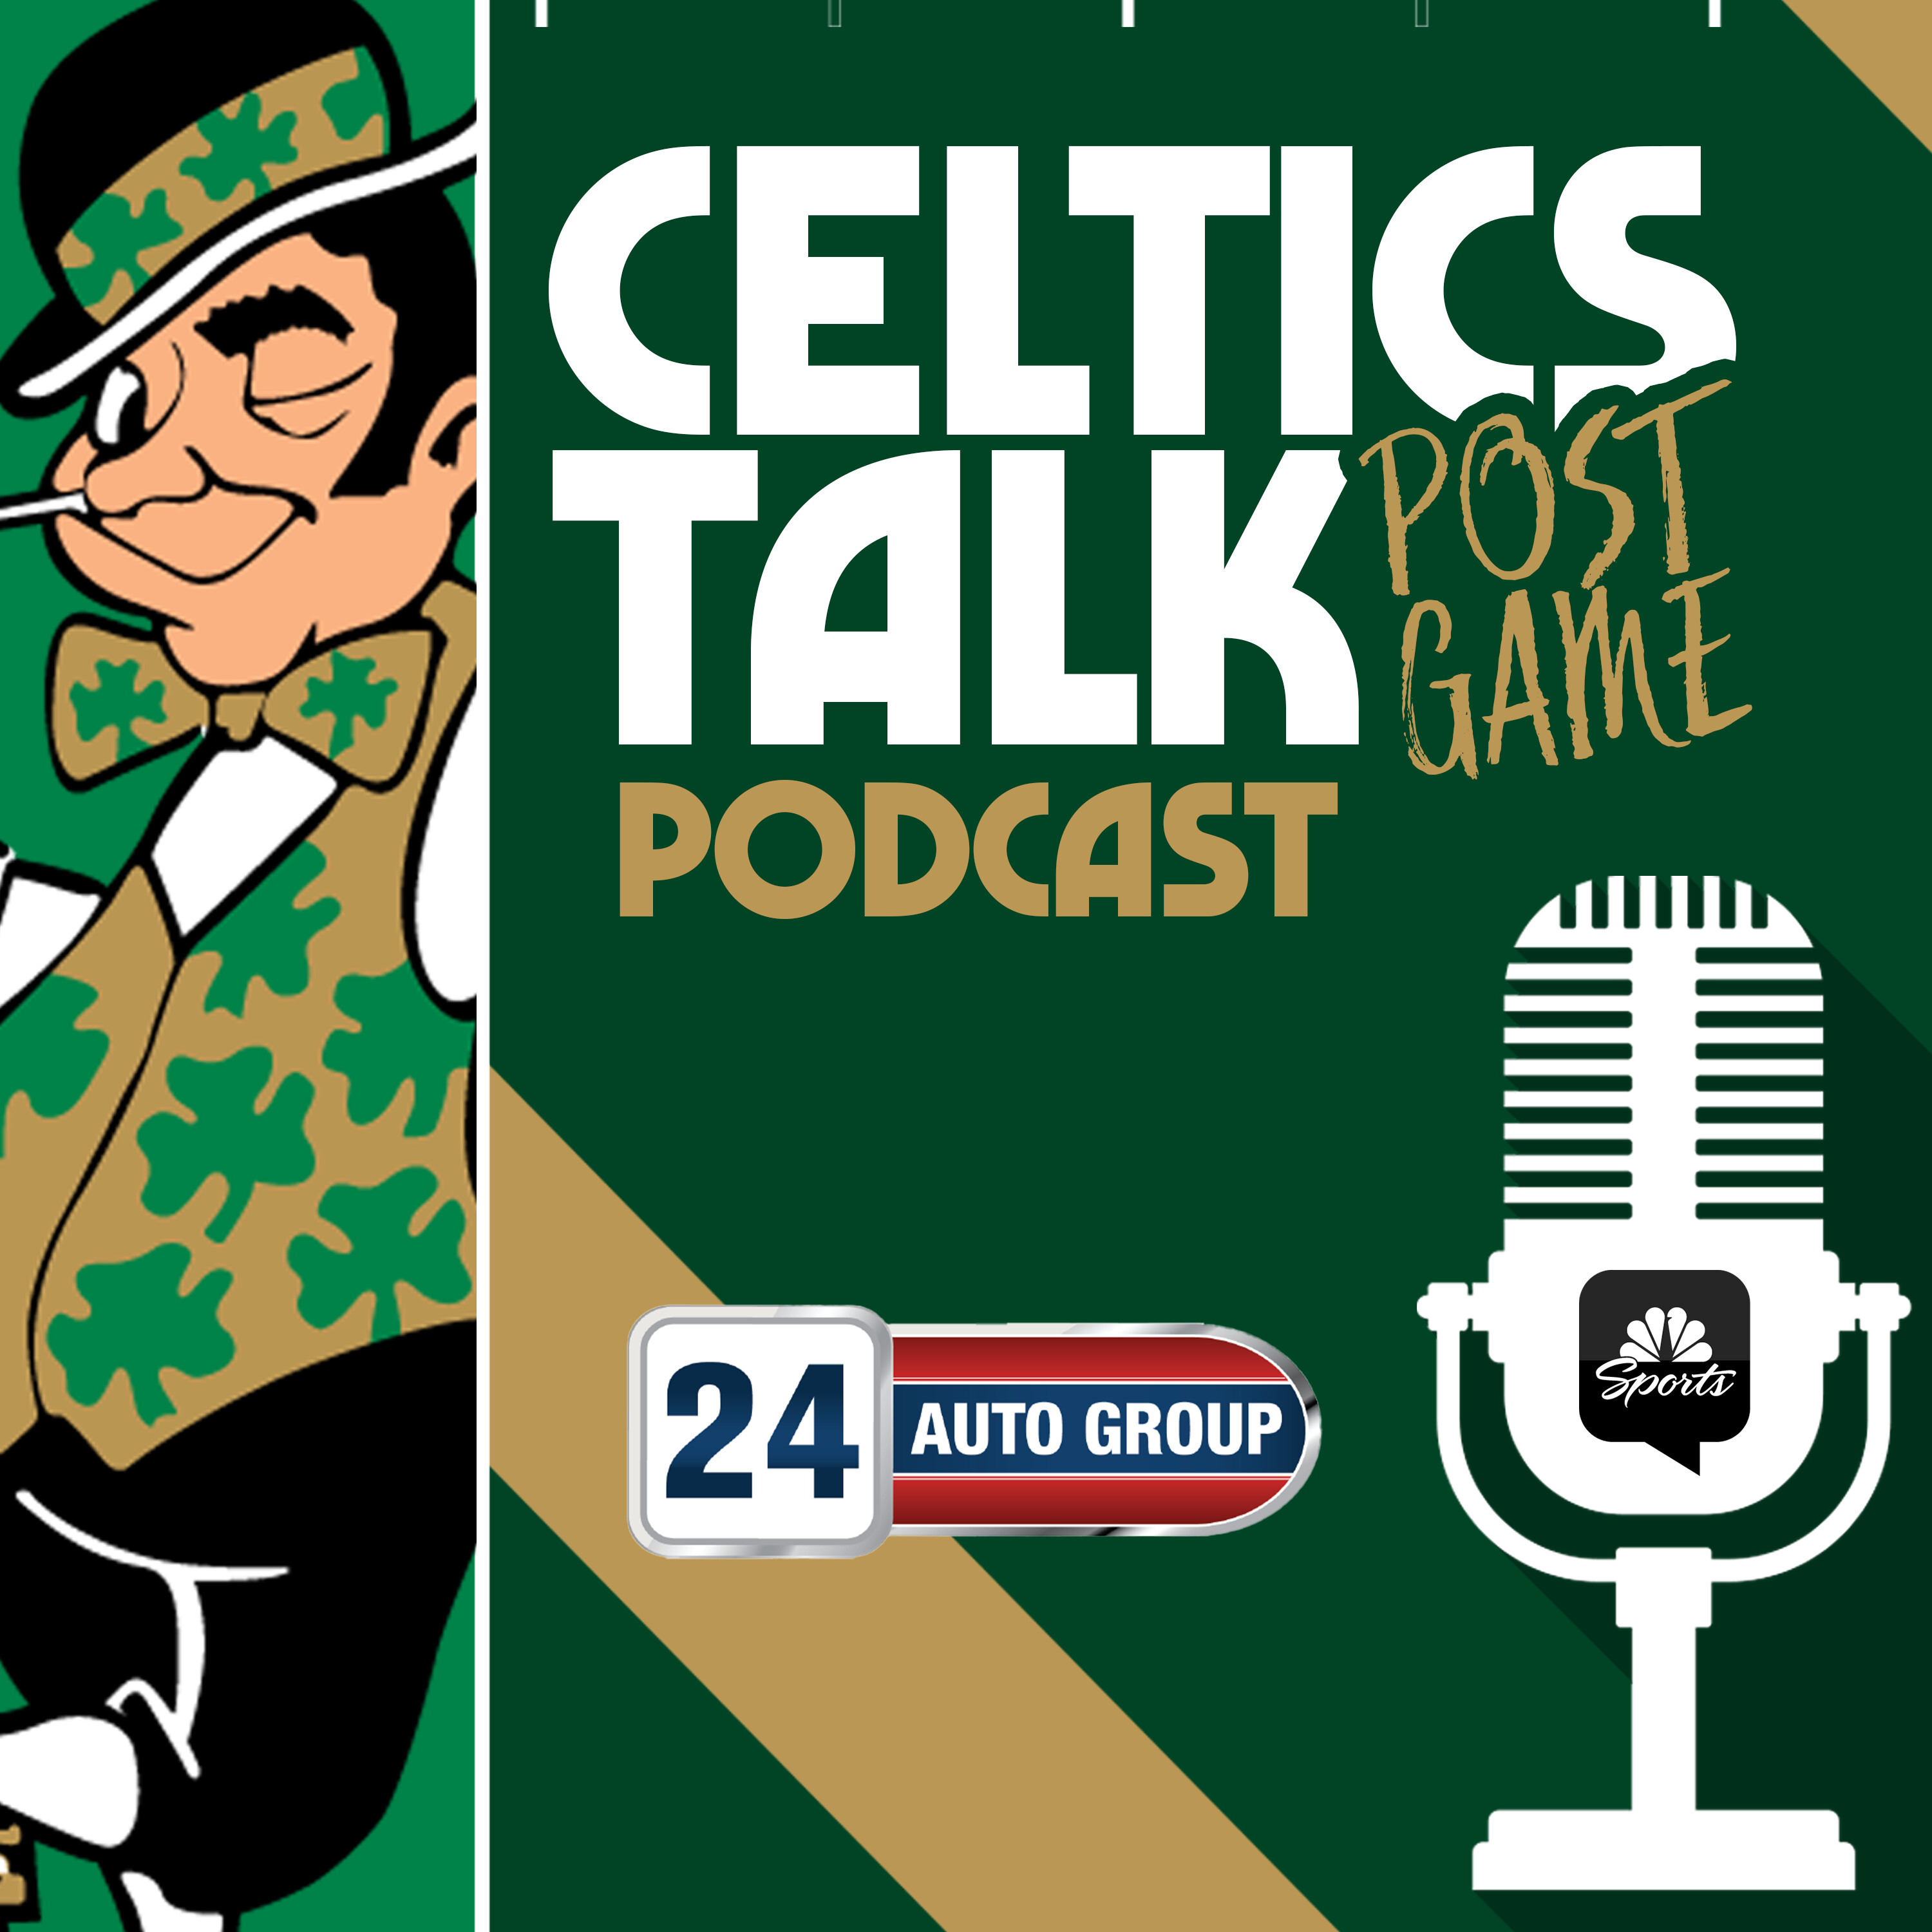 POSTGAME POD: Celtics pull off insane comeback after epic collapse by rival Lakers